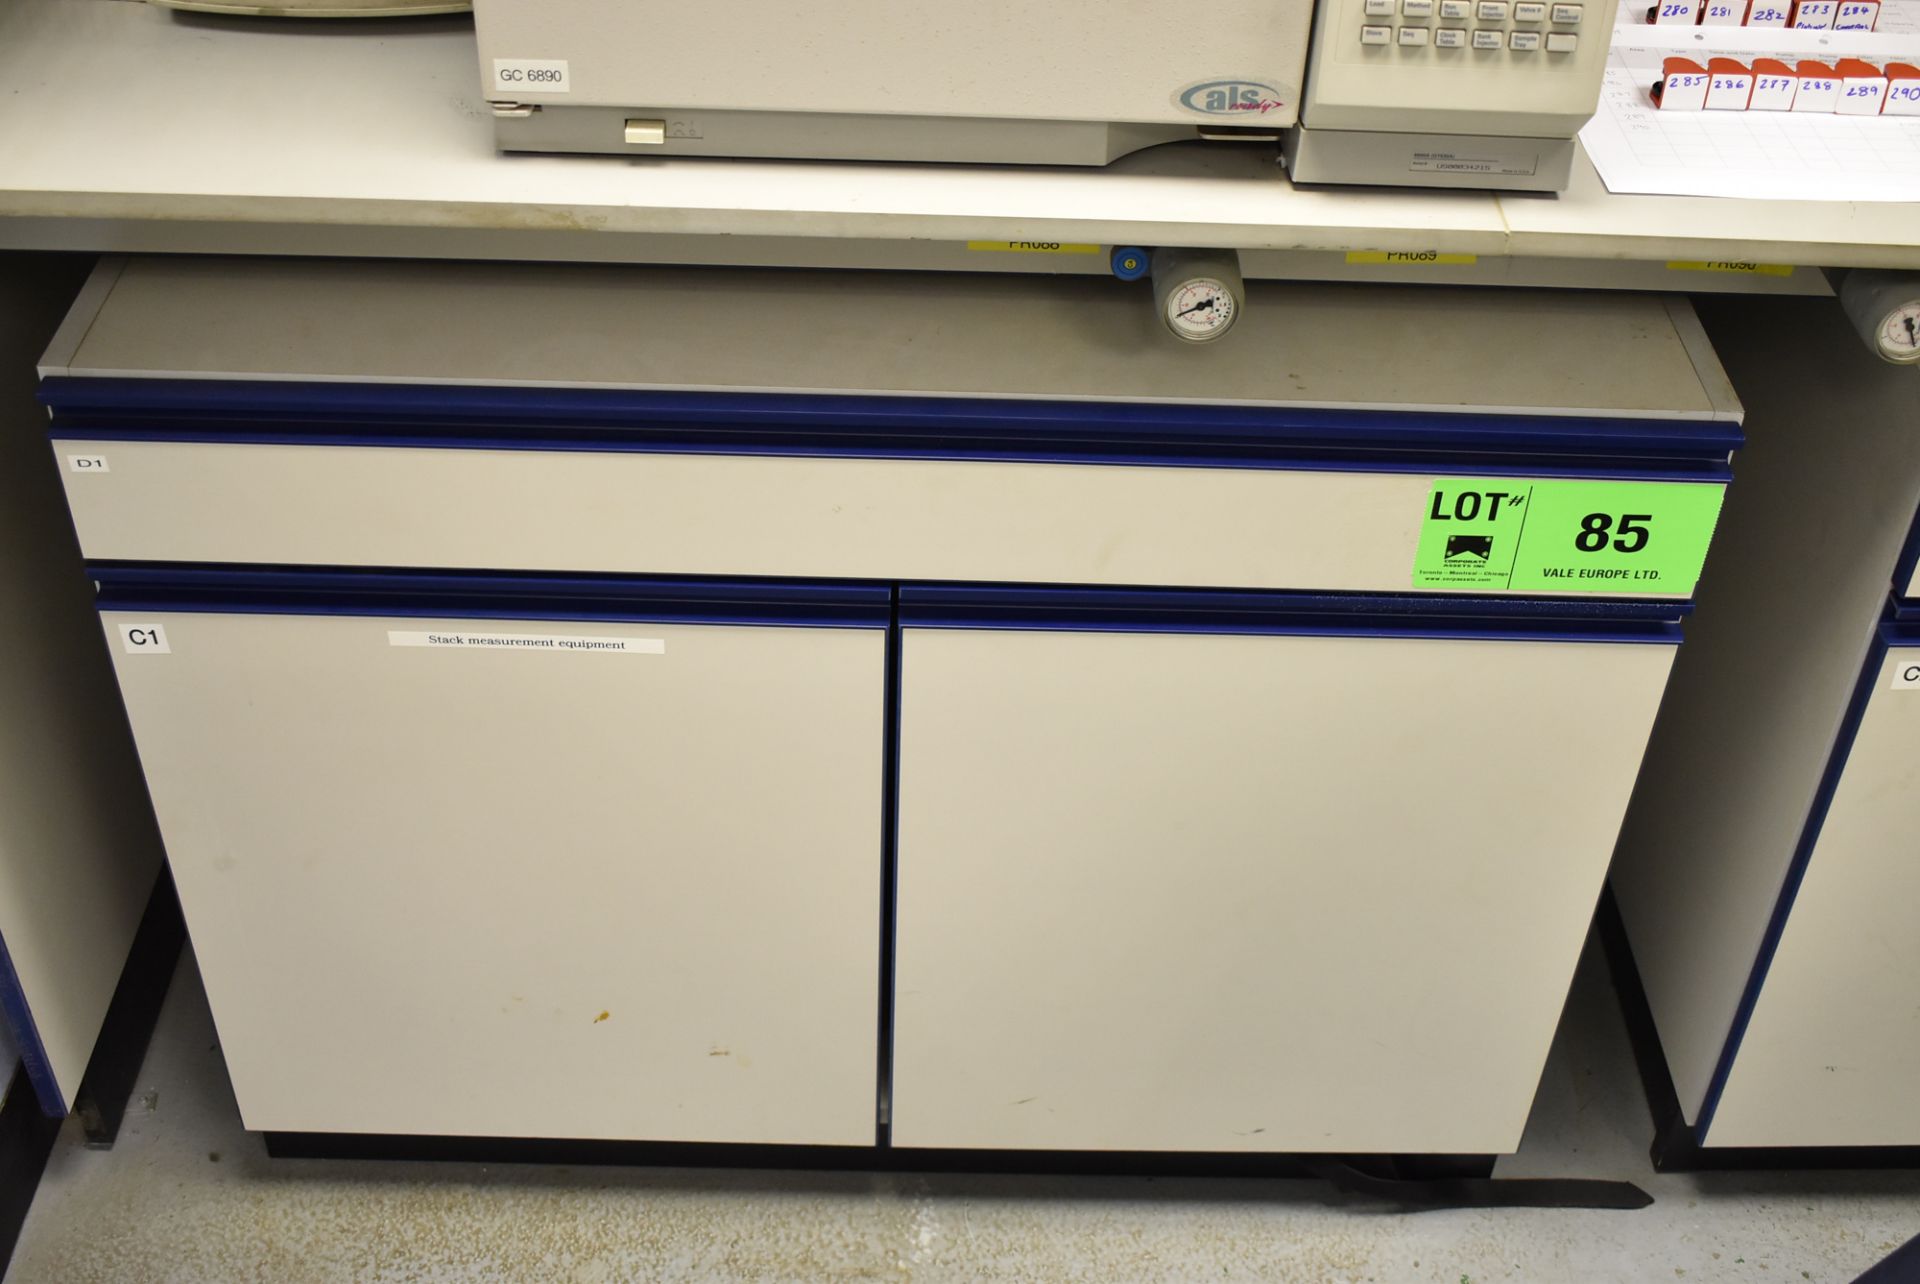 LOT/ 2 SECTION LAB STORAGE CABINET WITH CONTENTS - STACK MEASUREMENT EQUIPMENT & ACCESSORIES (ROOM